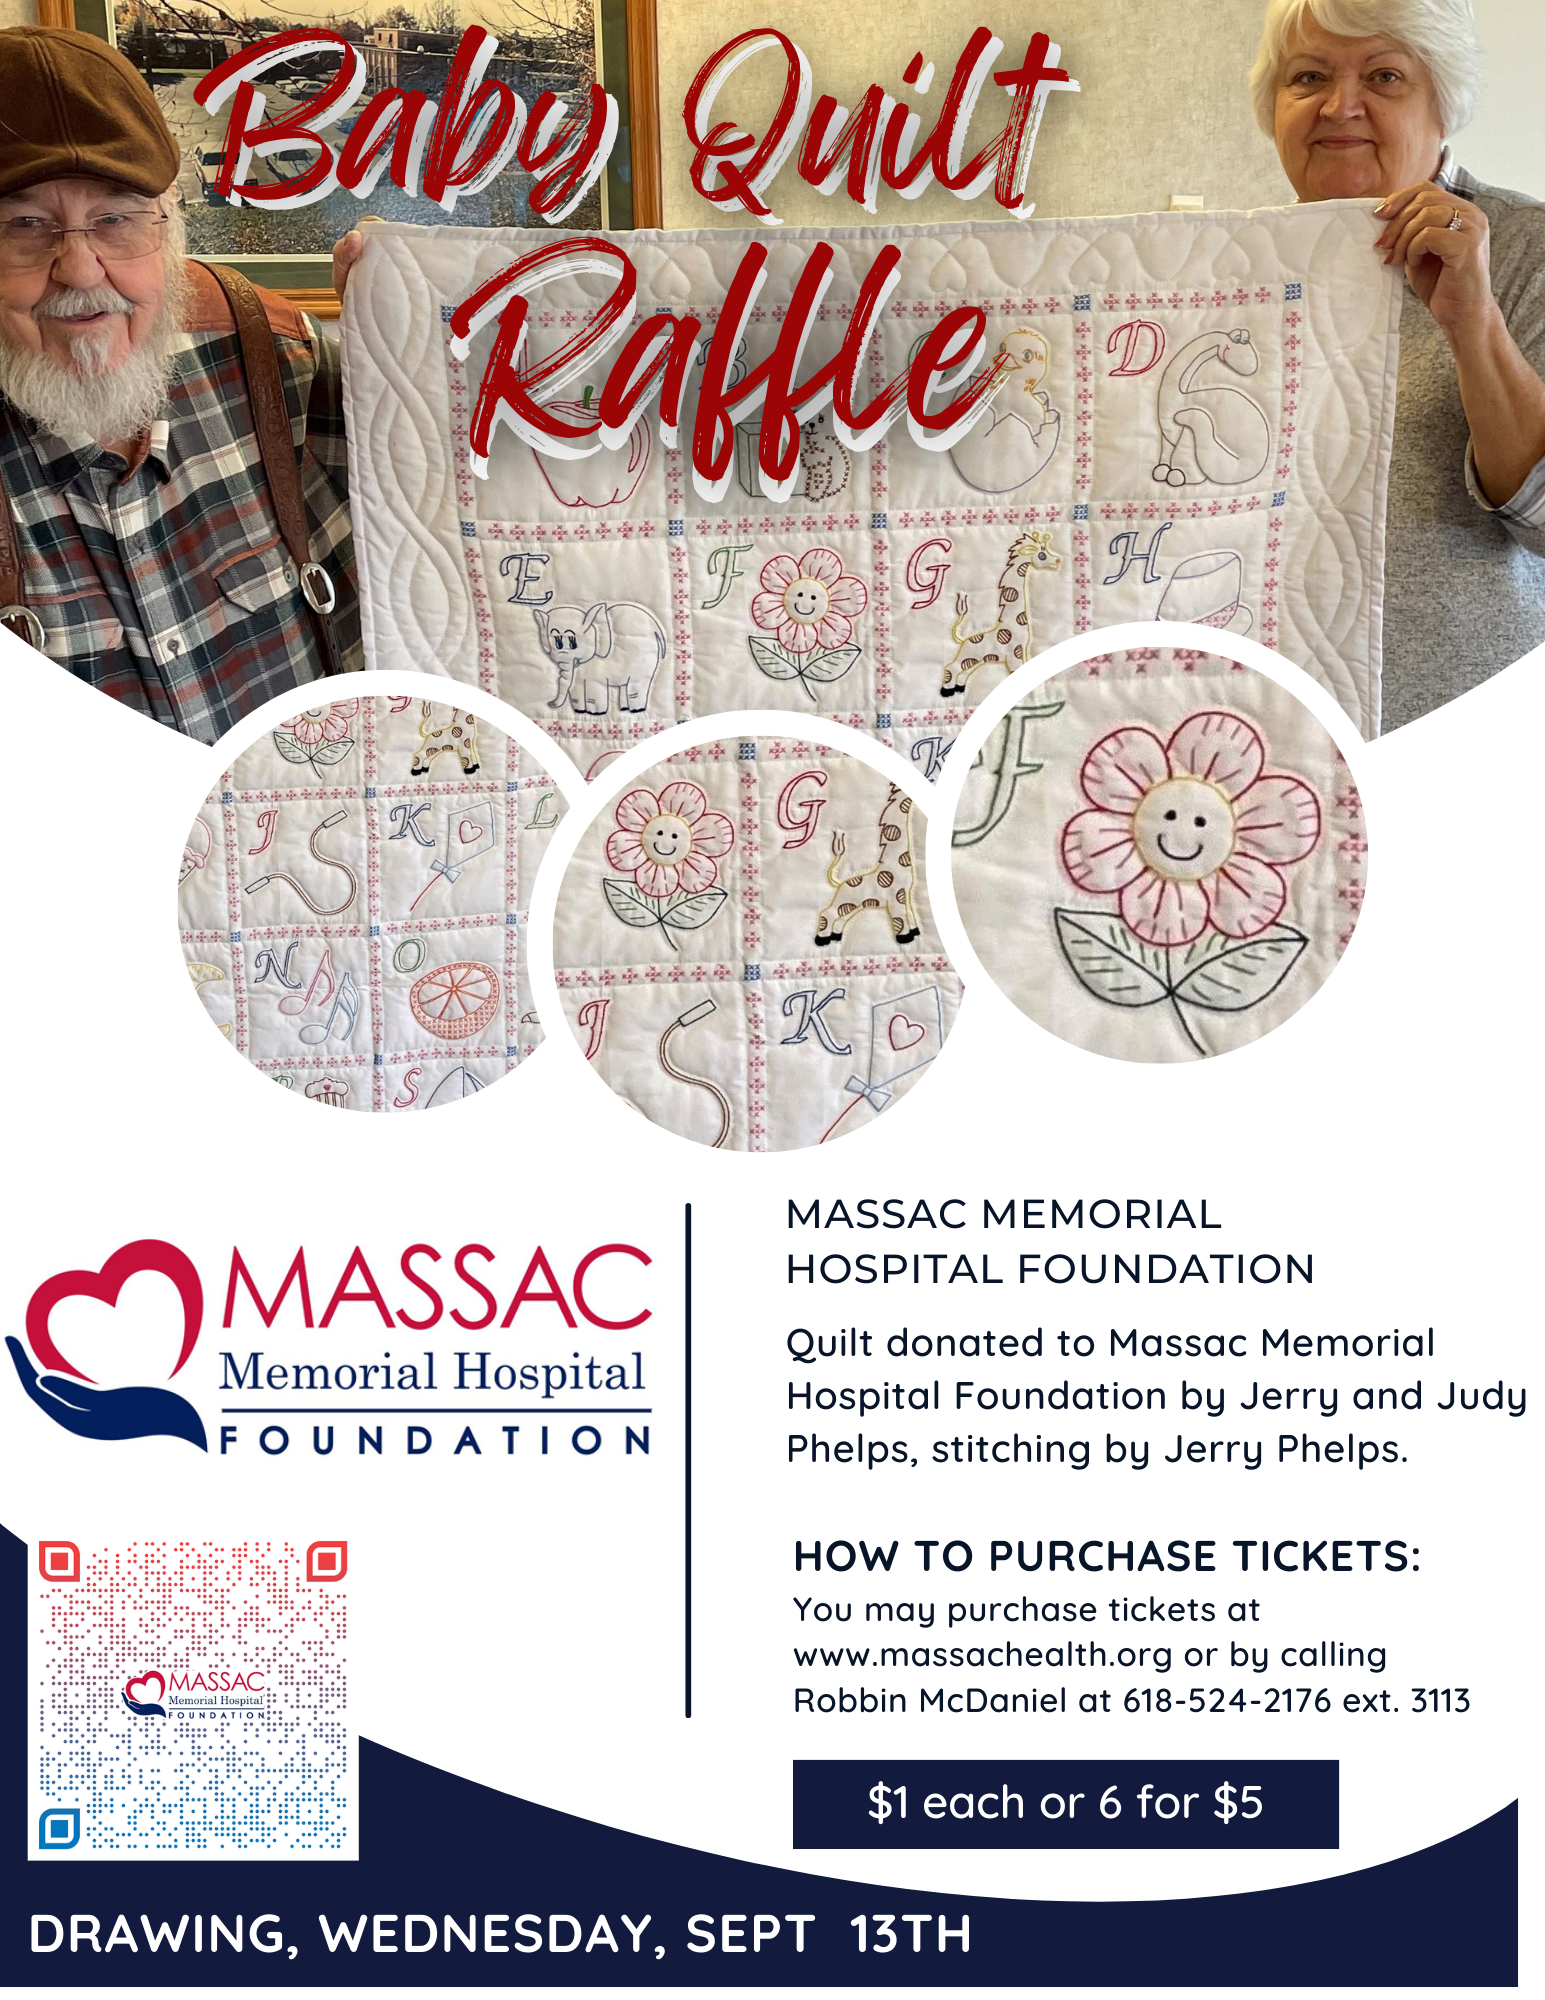 Baby Quilt Raffle 


MASSAC MEMORIAL HOSPITAL FOUNDATION

Quilt donated to Massac Memorial Hospital Foundation by Jerry and Judy Phelps, stitching by Jerry Phelps.

HOW TO PURCHASE TICKETS:

You may purchase tickets at www.massachealth.org or by calling Robbin McDaniel at 618-524-2176 ext. 3113

$1 each or 6 for $5

DRAWING, WEDNESDAY, SEPT 13TH

MASSAC Memorial Hospital FOUNDATION